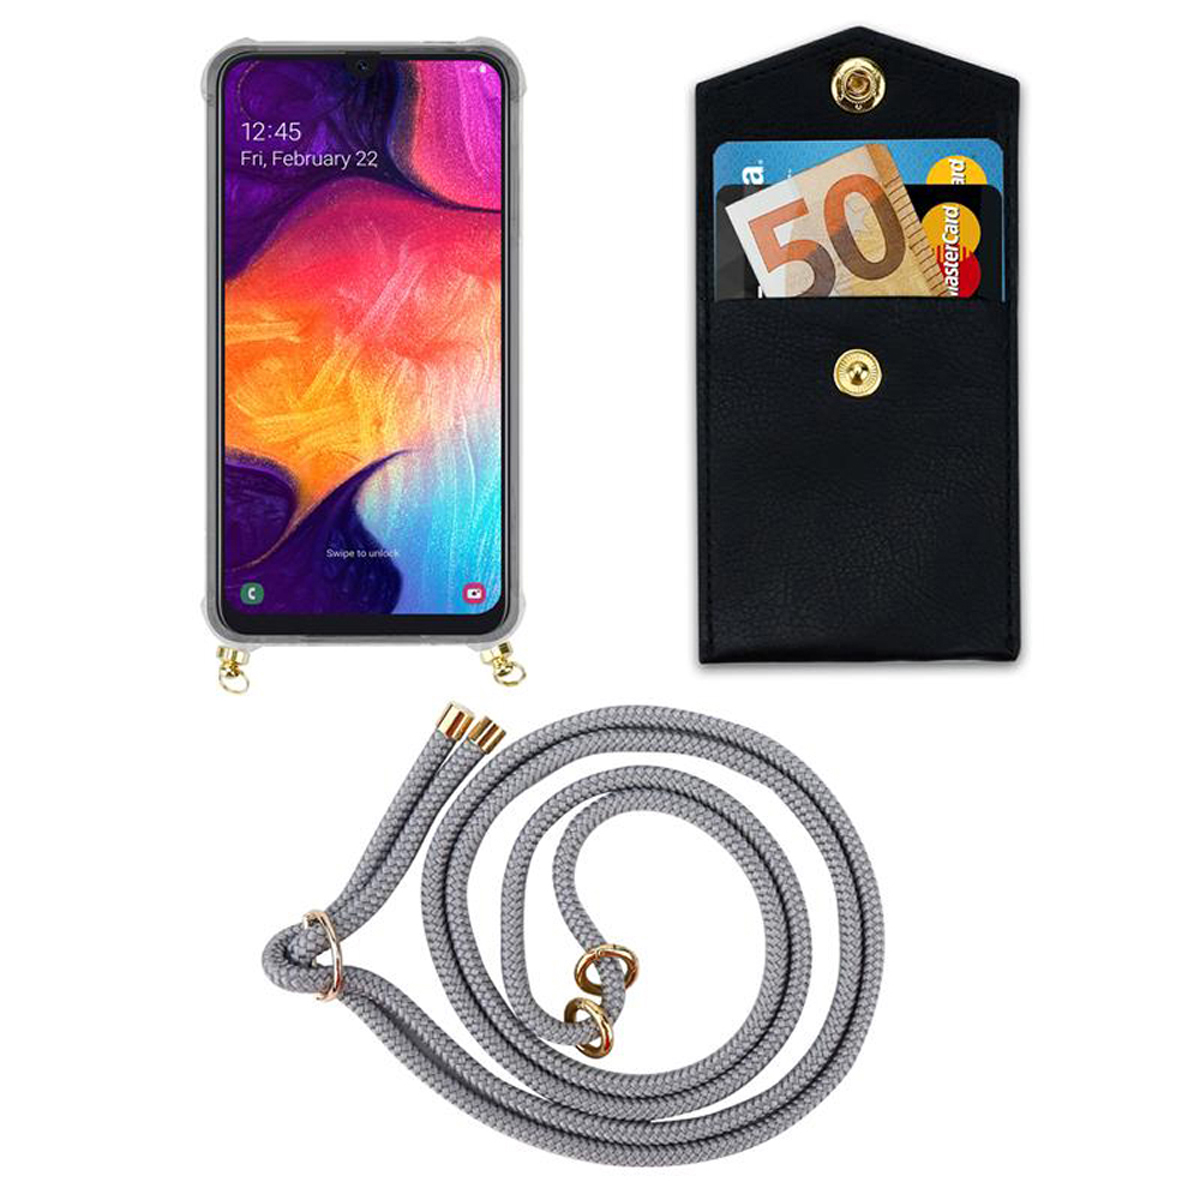 Ringen, A50 / SILBER Galaxy Gold abnehmbarer A50s mit Band / 4G Kette Handy A30s, und Hülle, Samsung, CADORABO Backcover, GRAU Kordel